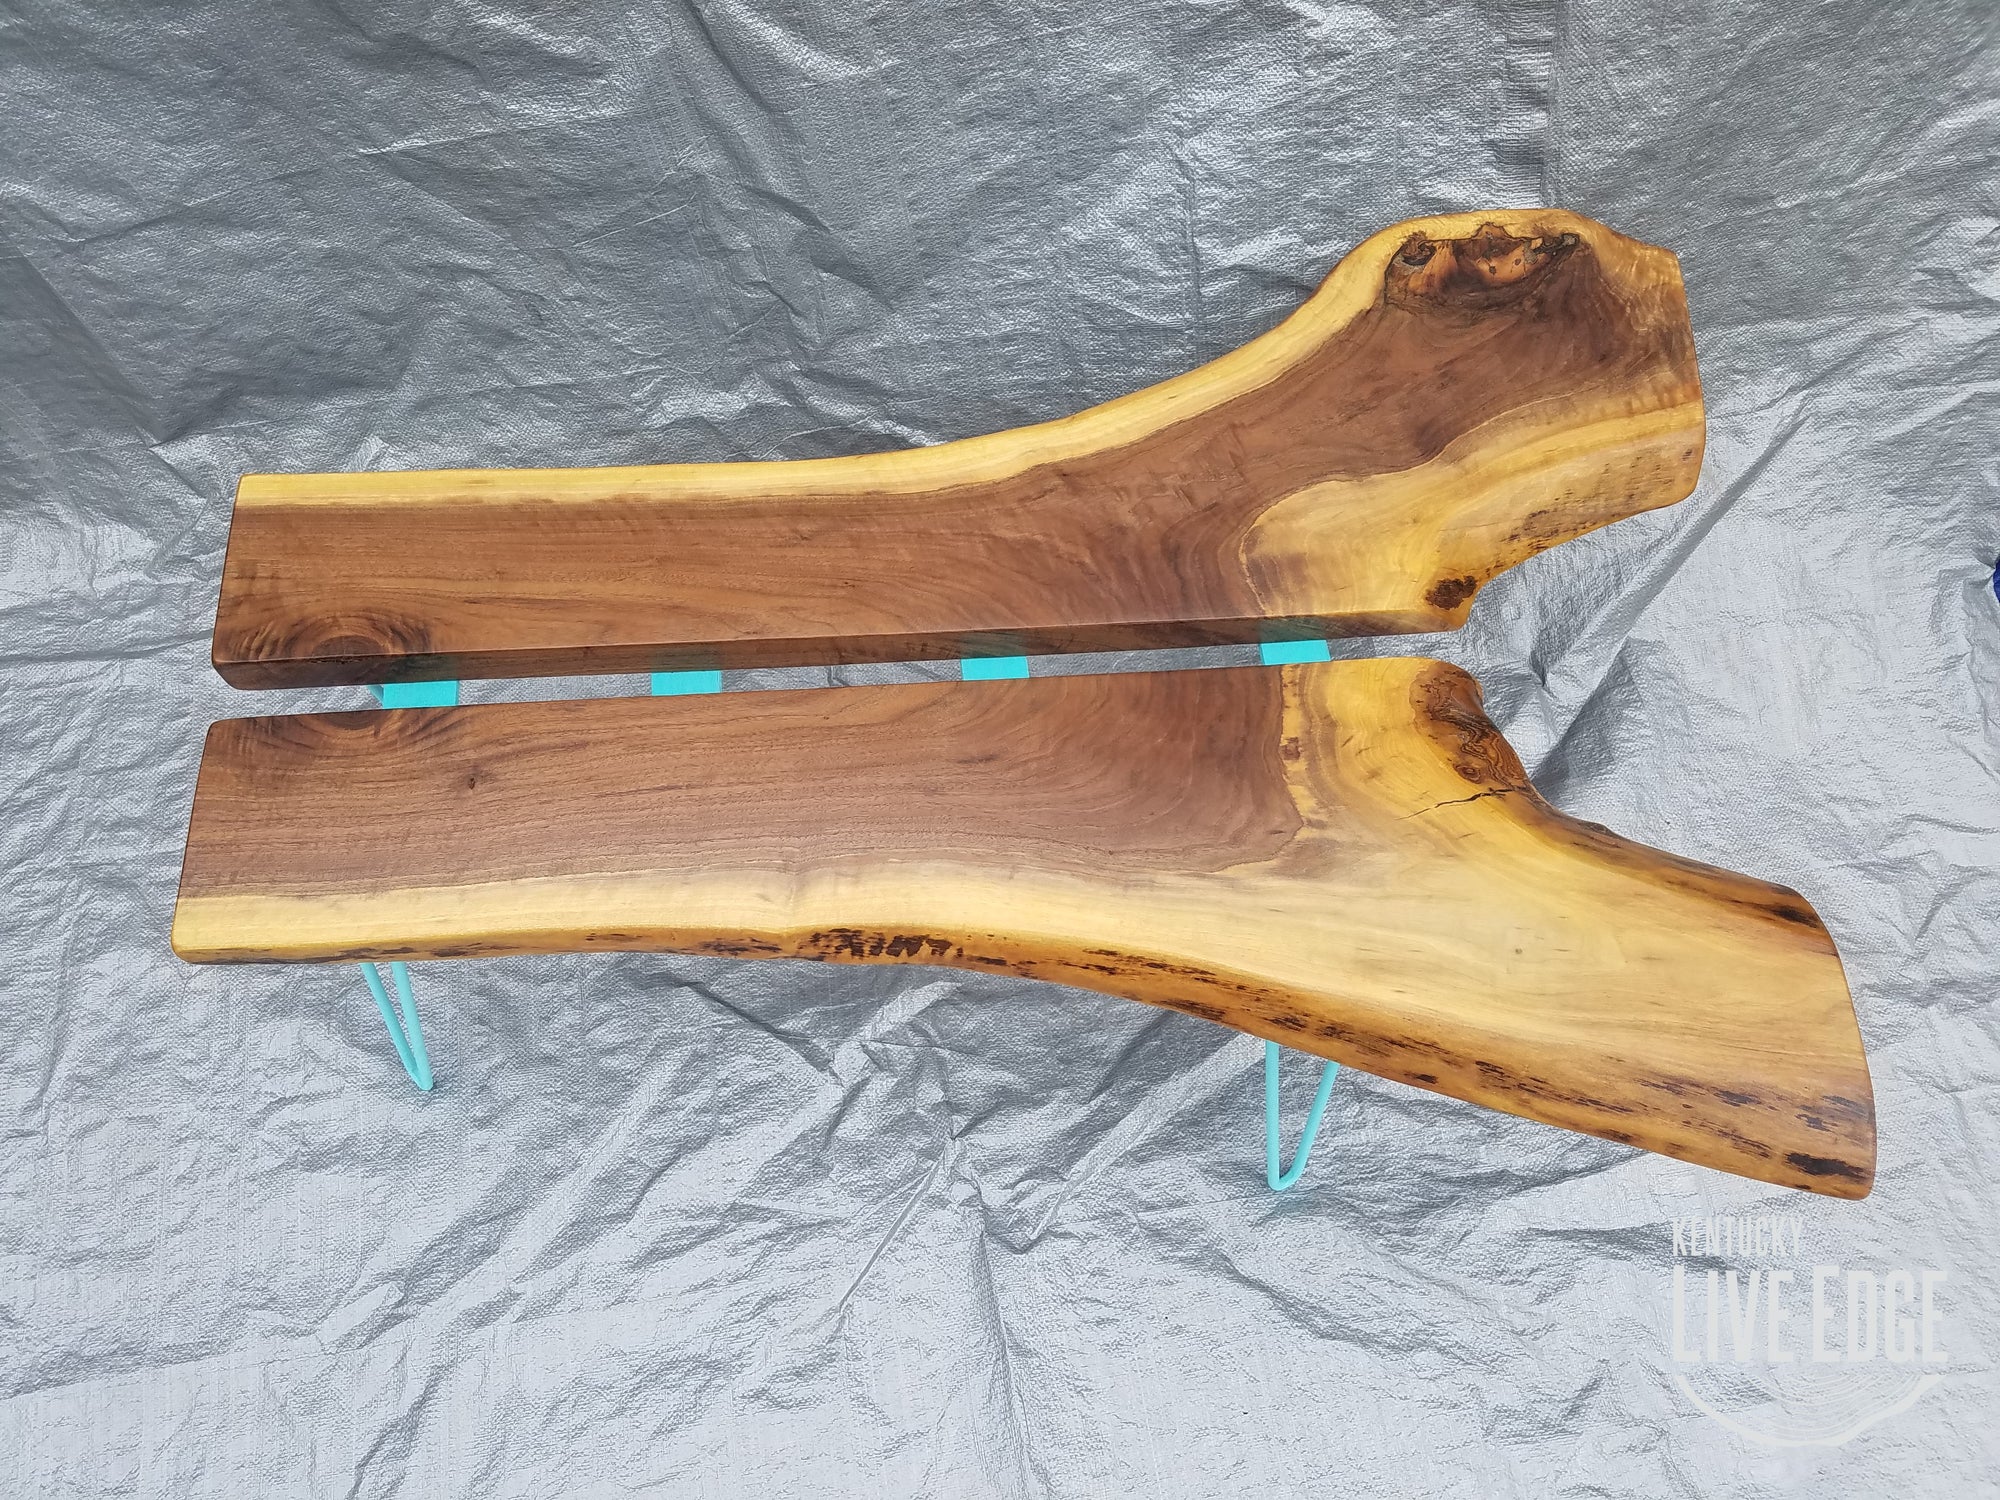 Teal Coffee Table- Live Edge- Turquoise- Mid Century- Organic- Modern- Rustic- Reclaimed- Furniture- Handmade- Living Room- Unique- Large